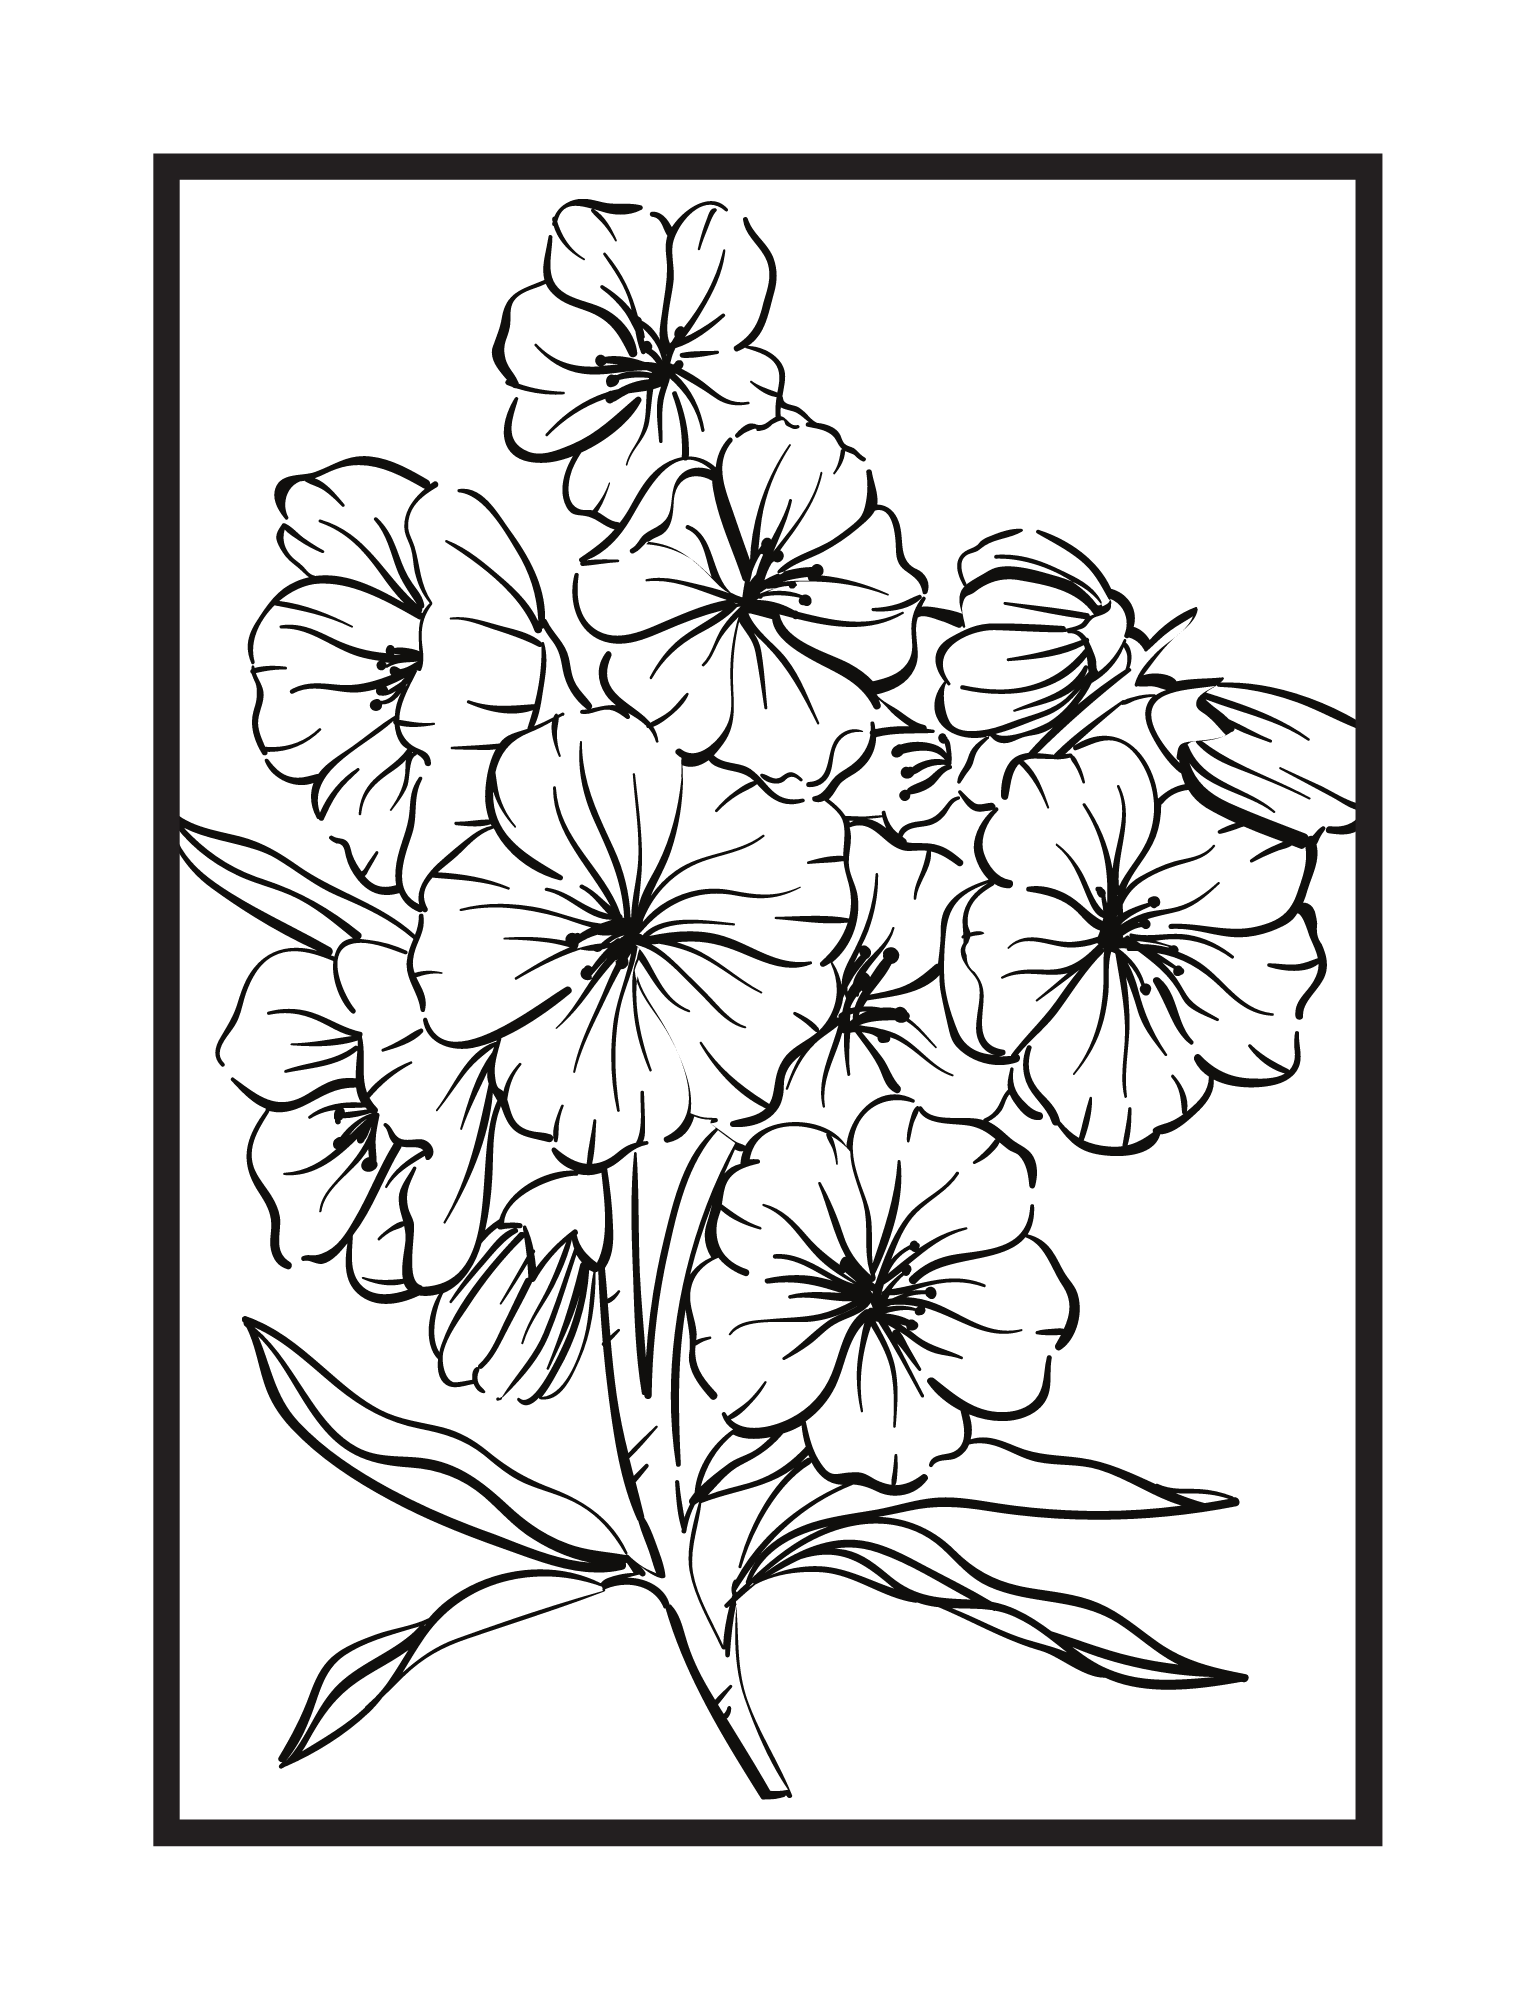 I WILL CREATE UNIQUE AND BEAUTIFUL COLORING PAGES FOR KIDS AND ADULTS 